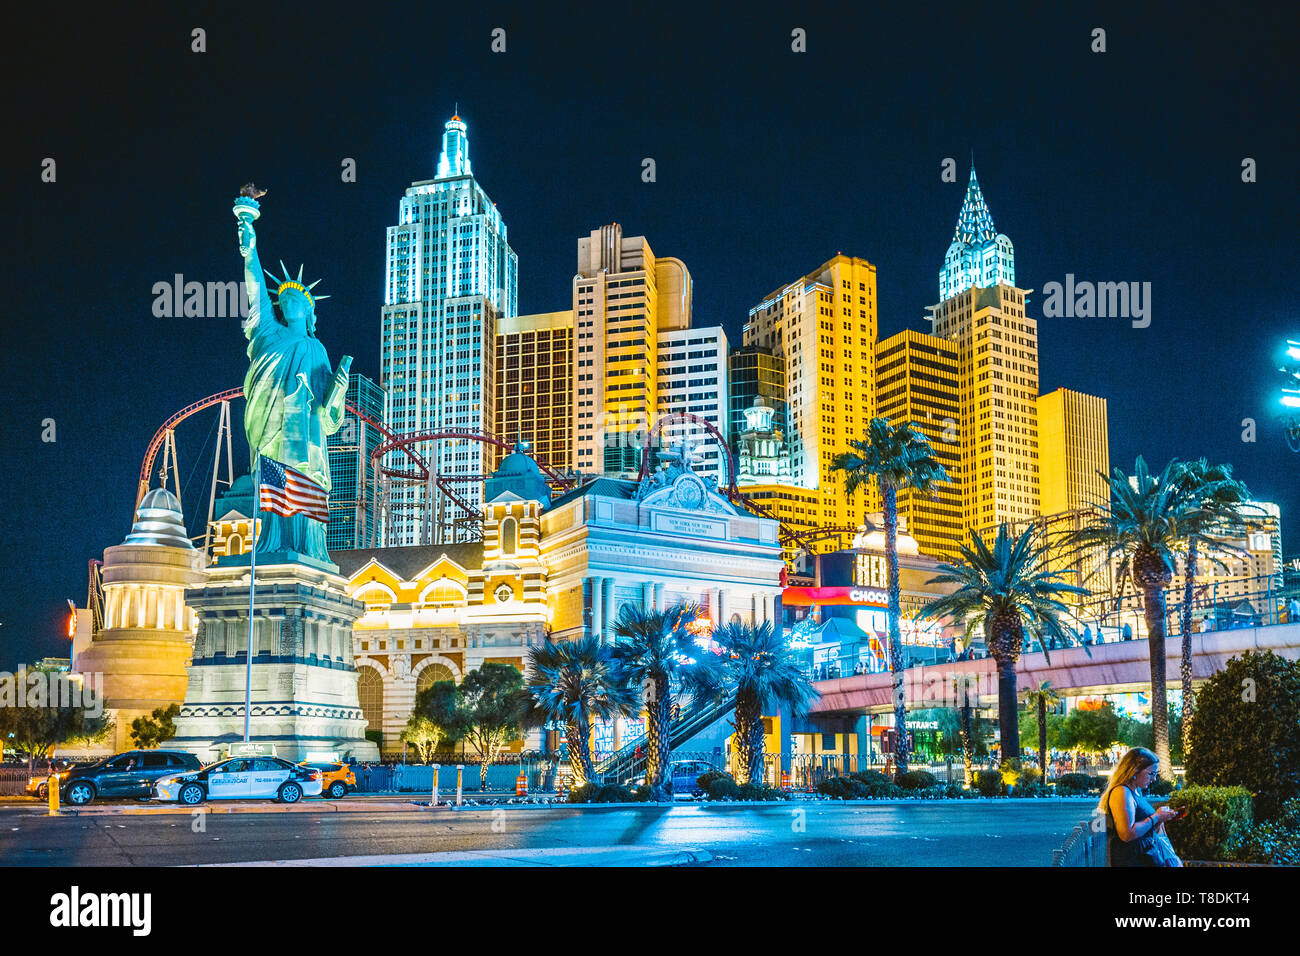 LAS VEGAS, USA - September 20, 2016: Colorful Downtown Las Vegas with world famous Strip and New York New York hotel and casino complex illuminated be Stock Photo